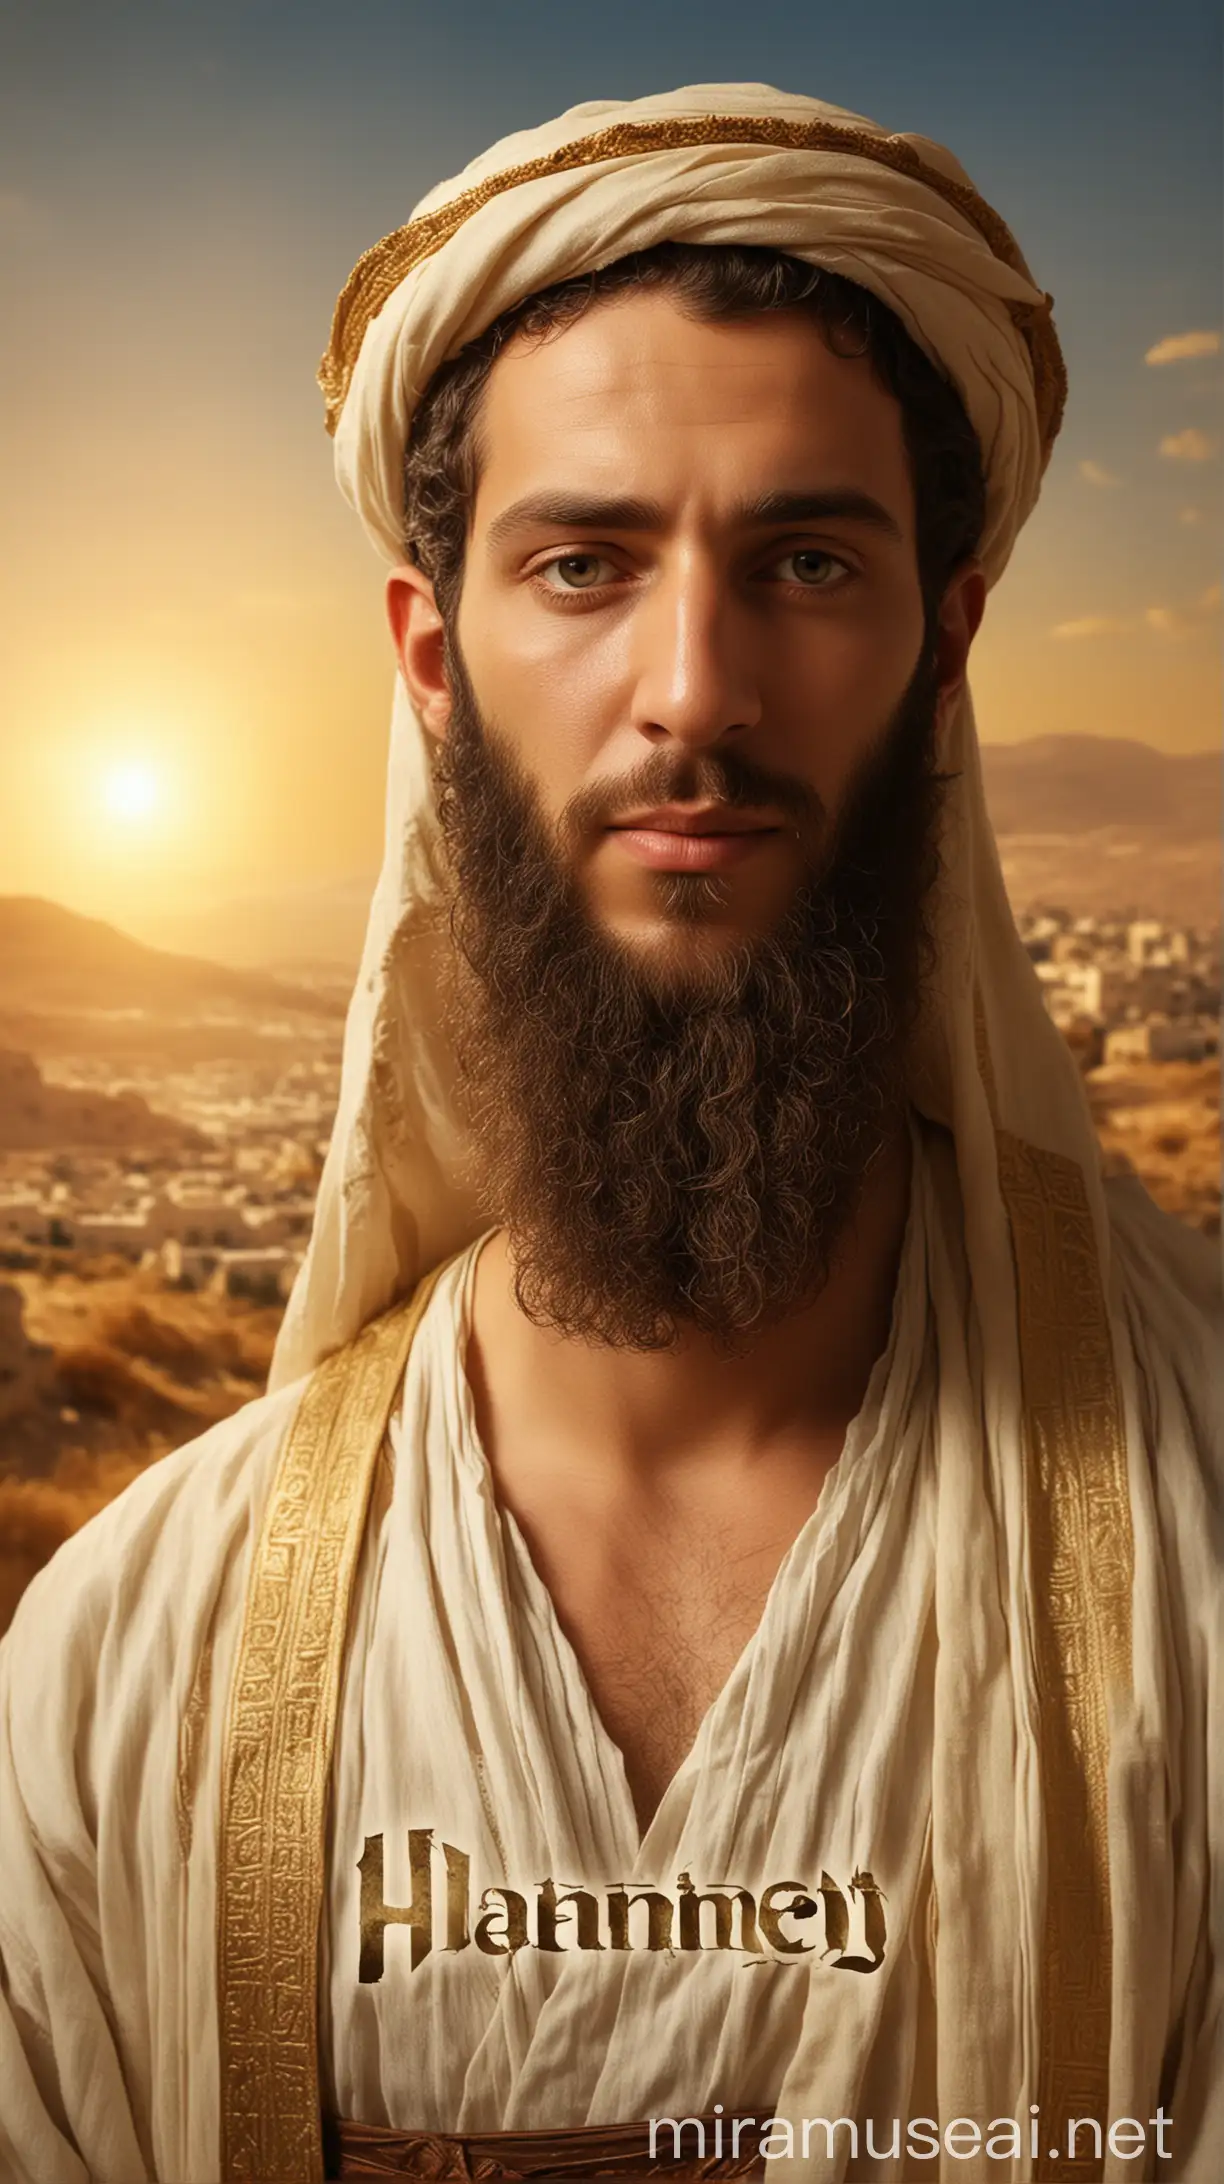 Create an image of a dignified man in ancient Hebrew attire, with the name "Hanameel" written in Hebrew above him. The background should feature a serene, golden light suggesting divine favor. In ancient world 